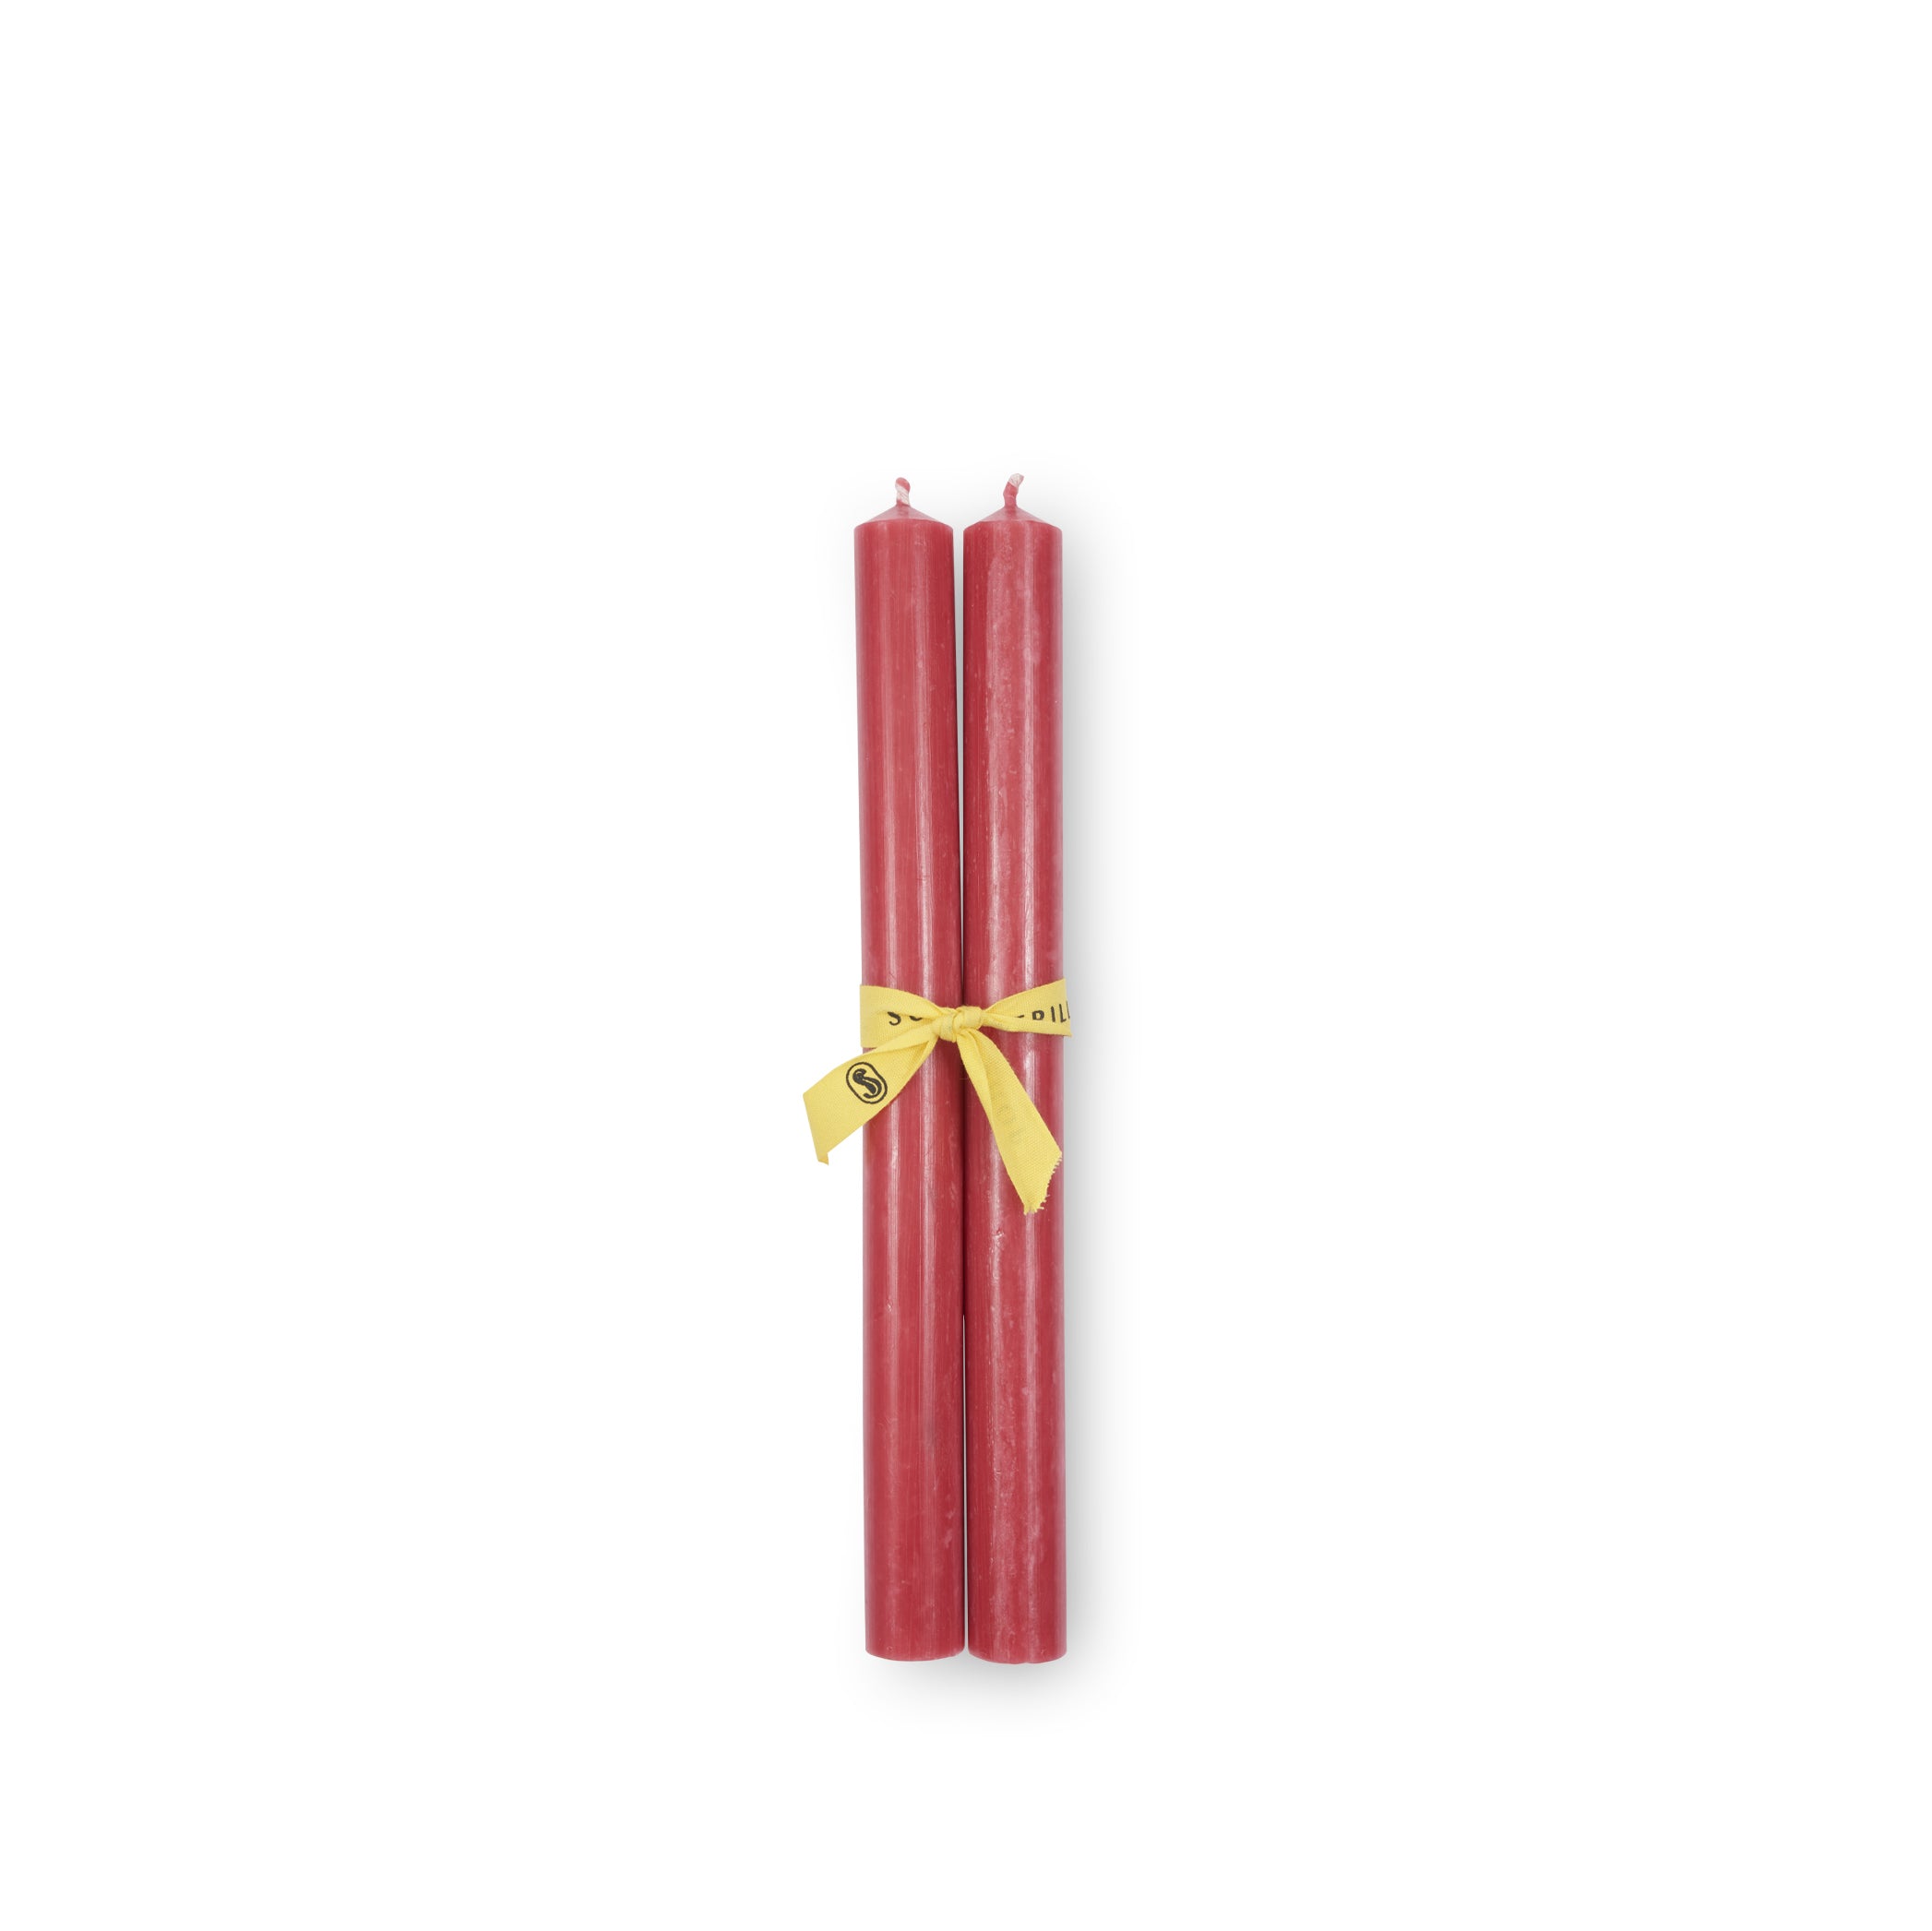 Pair of Coloured Church Candles in Fuchsia Pink